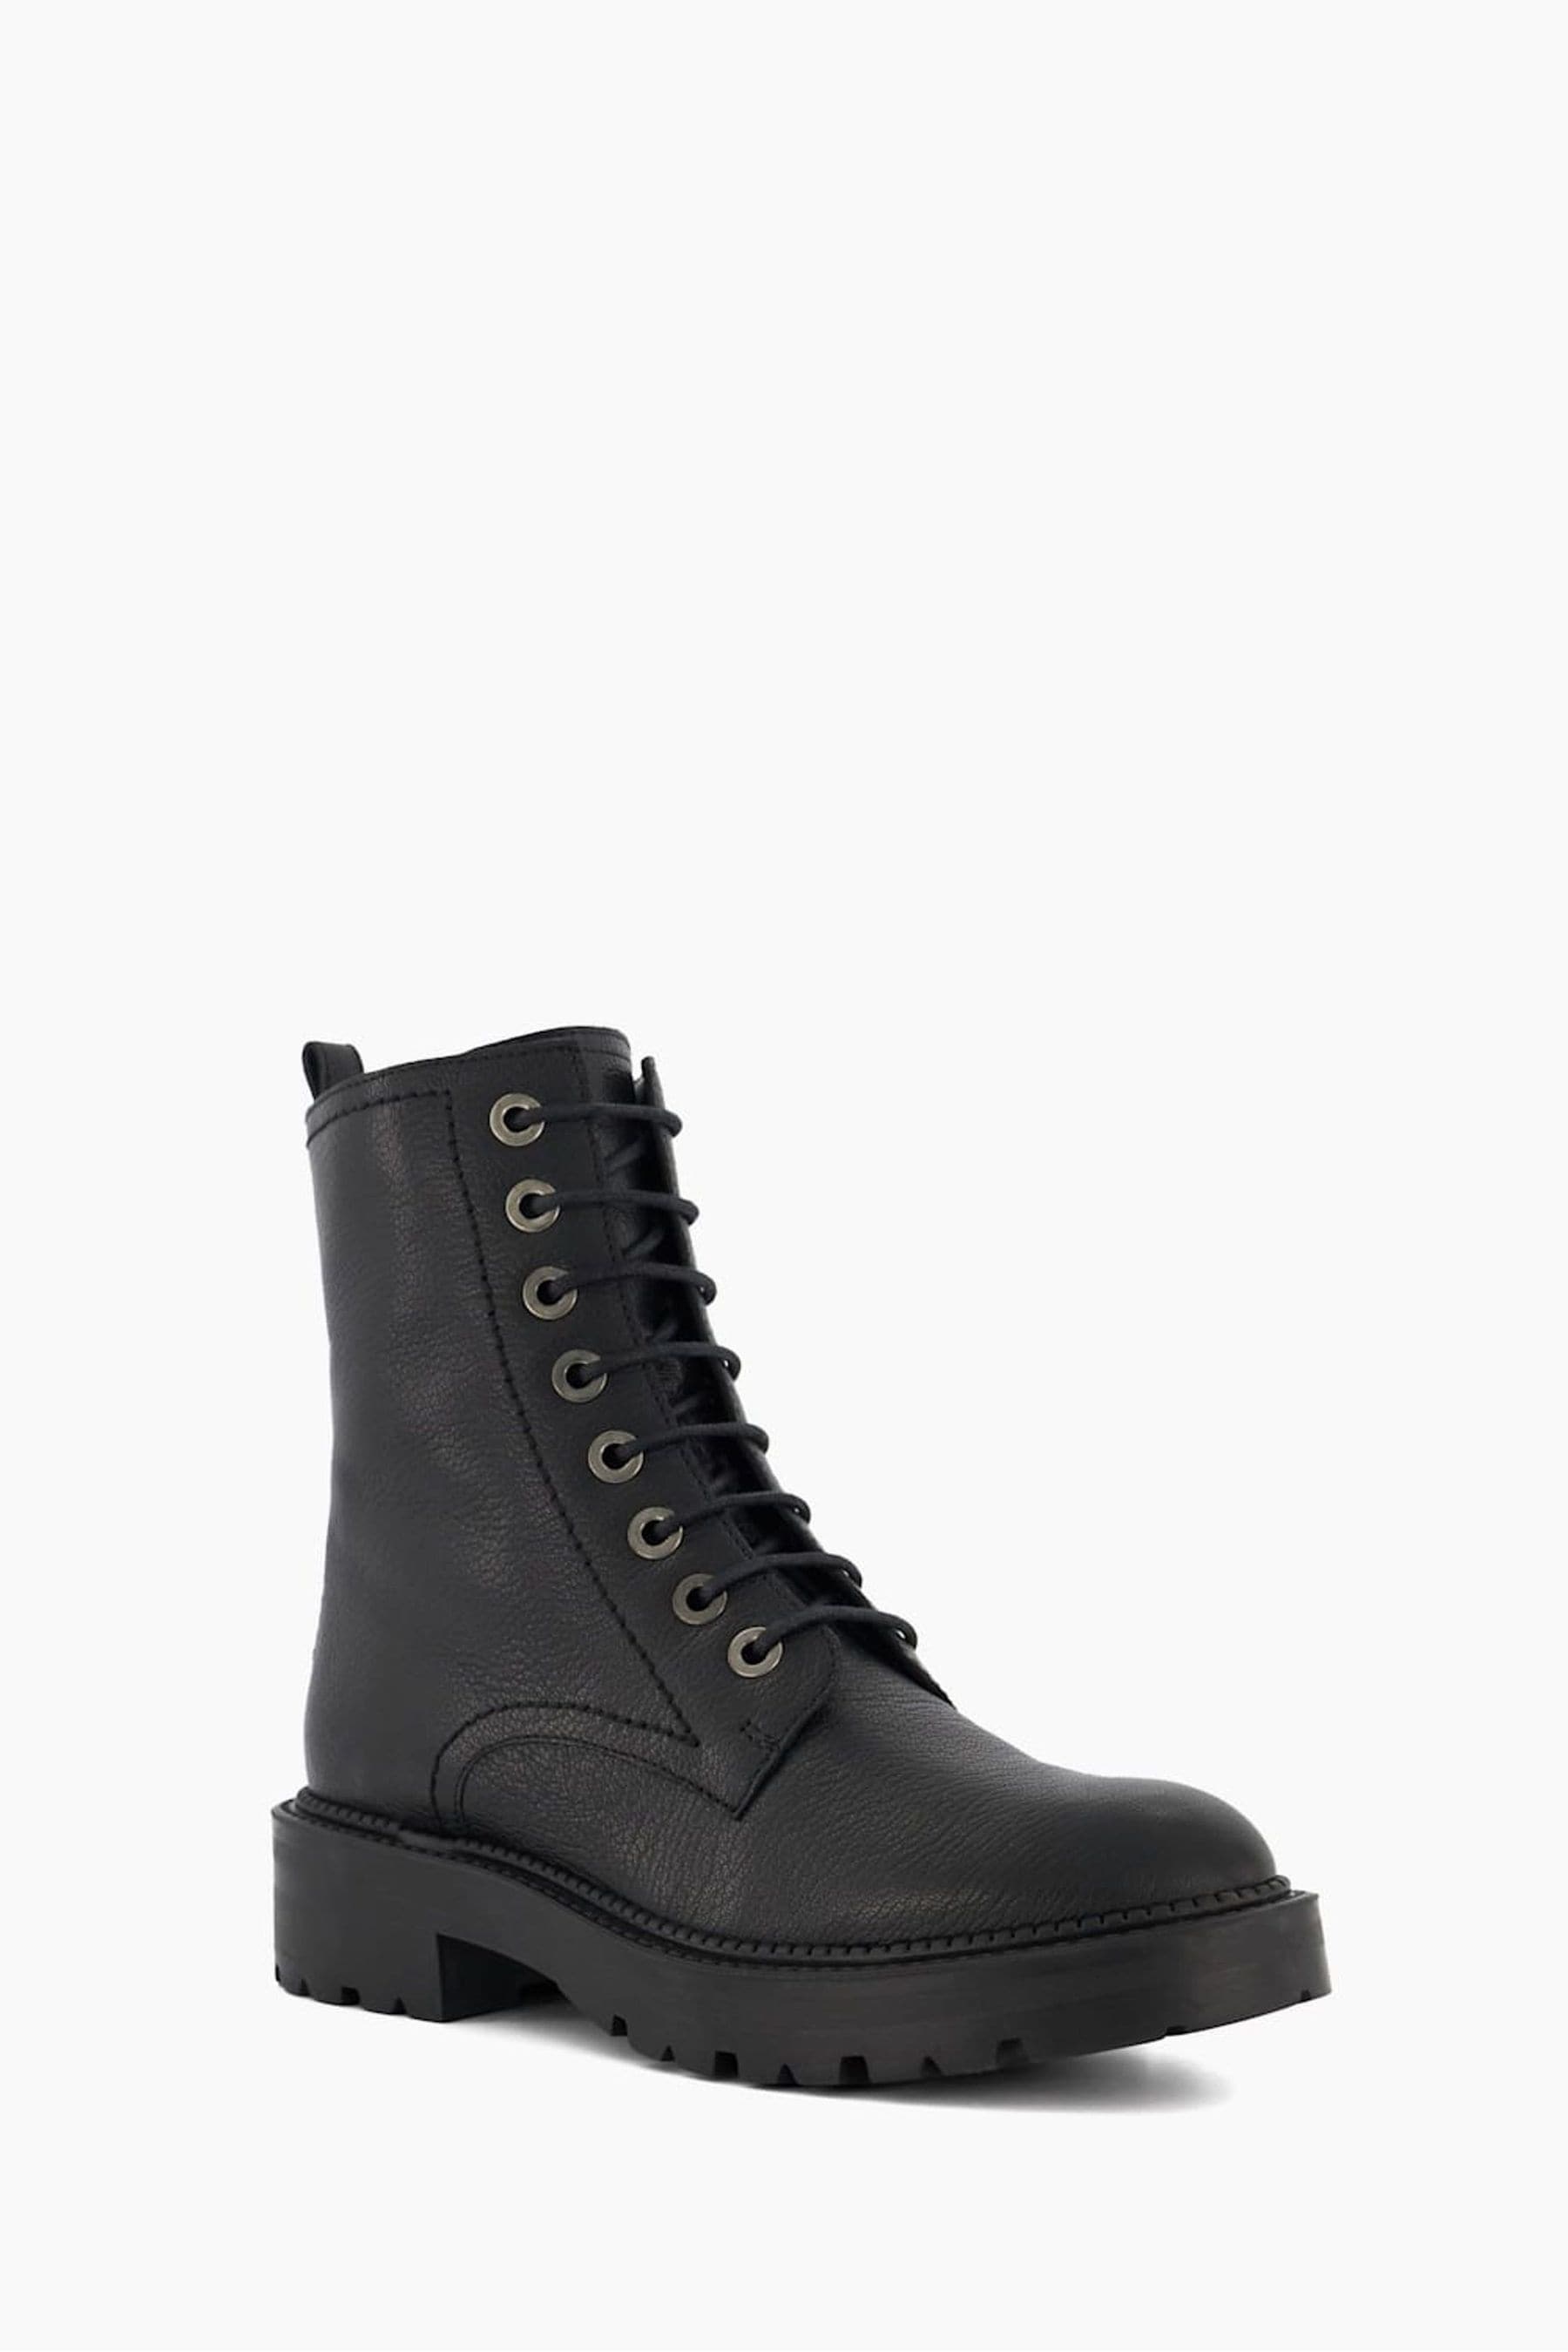 Buy Dune London Press Cleated Hiker Boots from the Next UK online shop